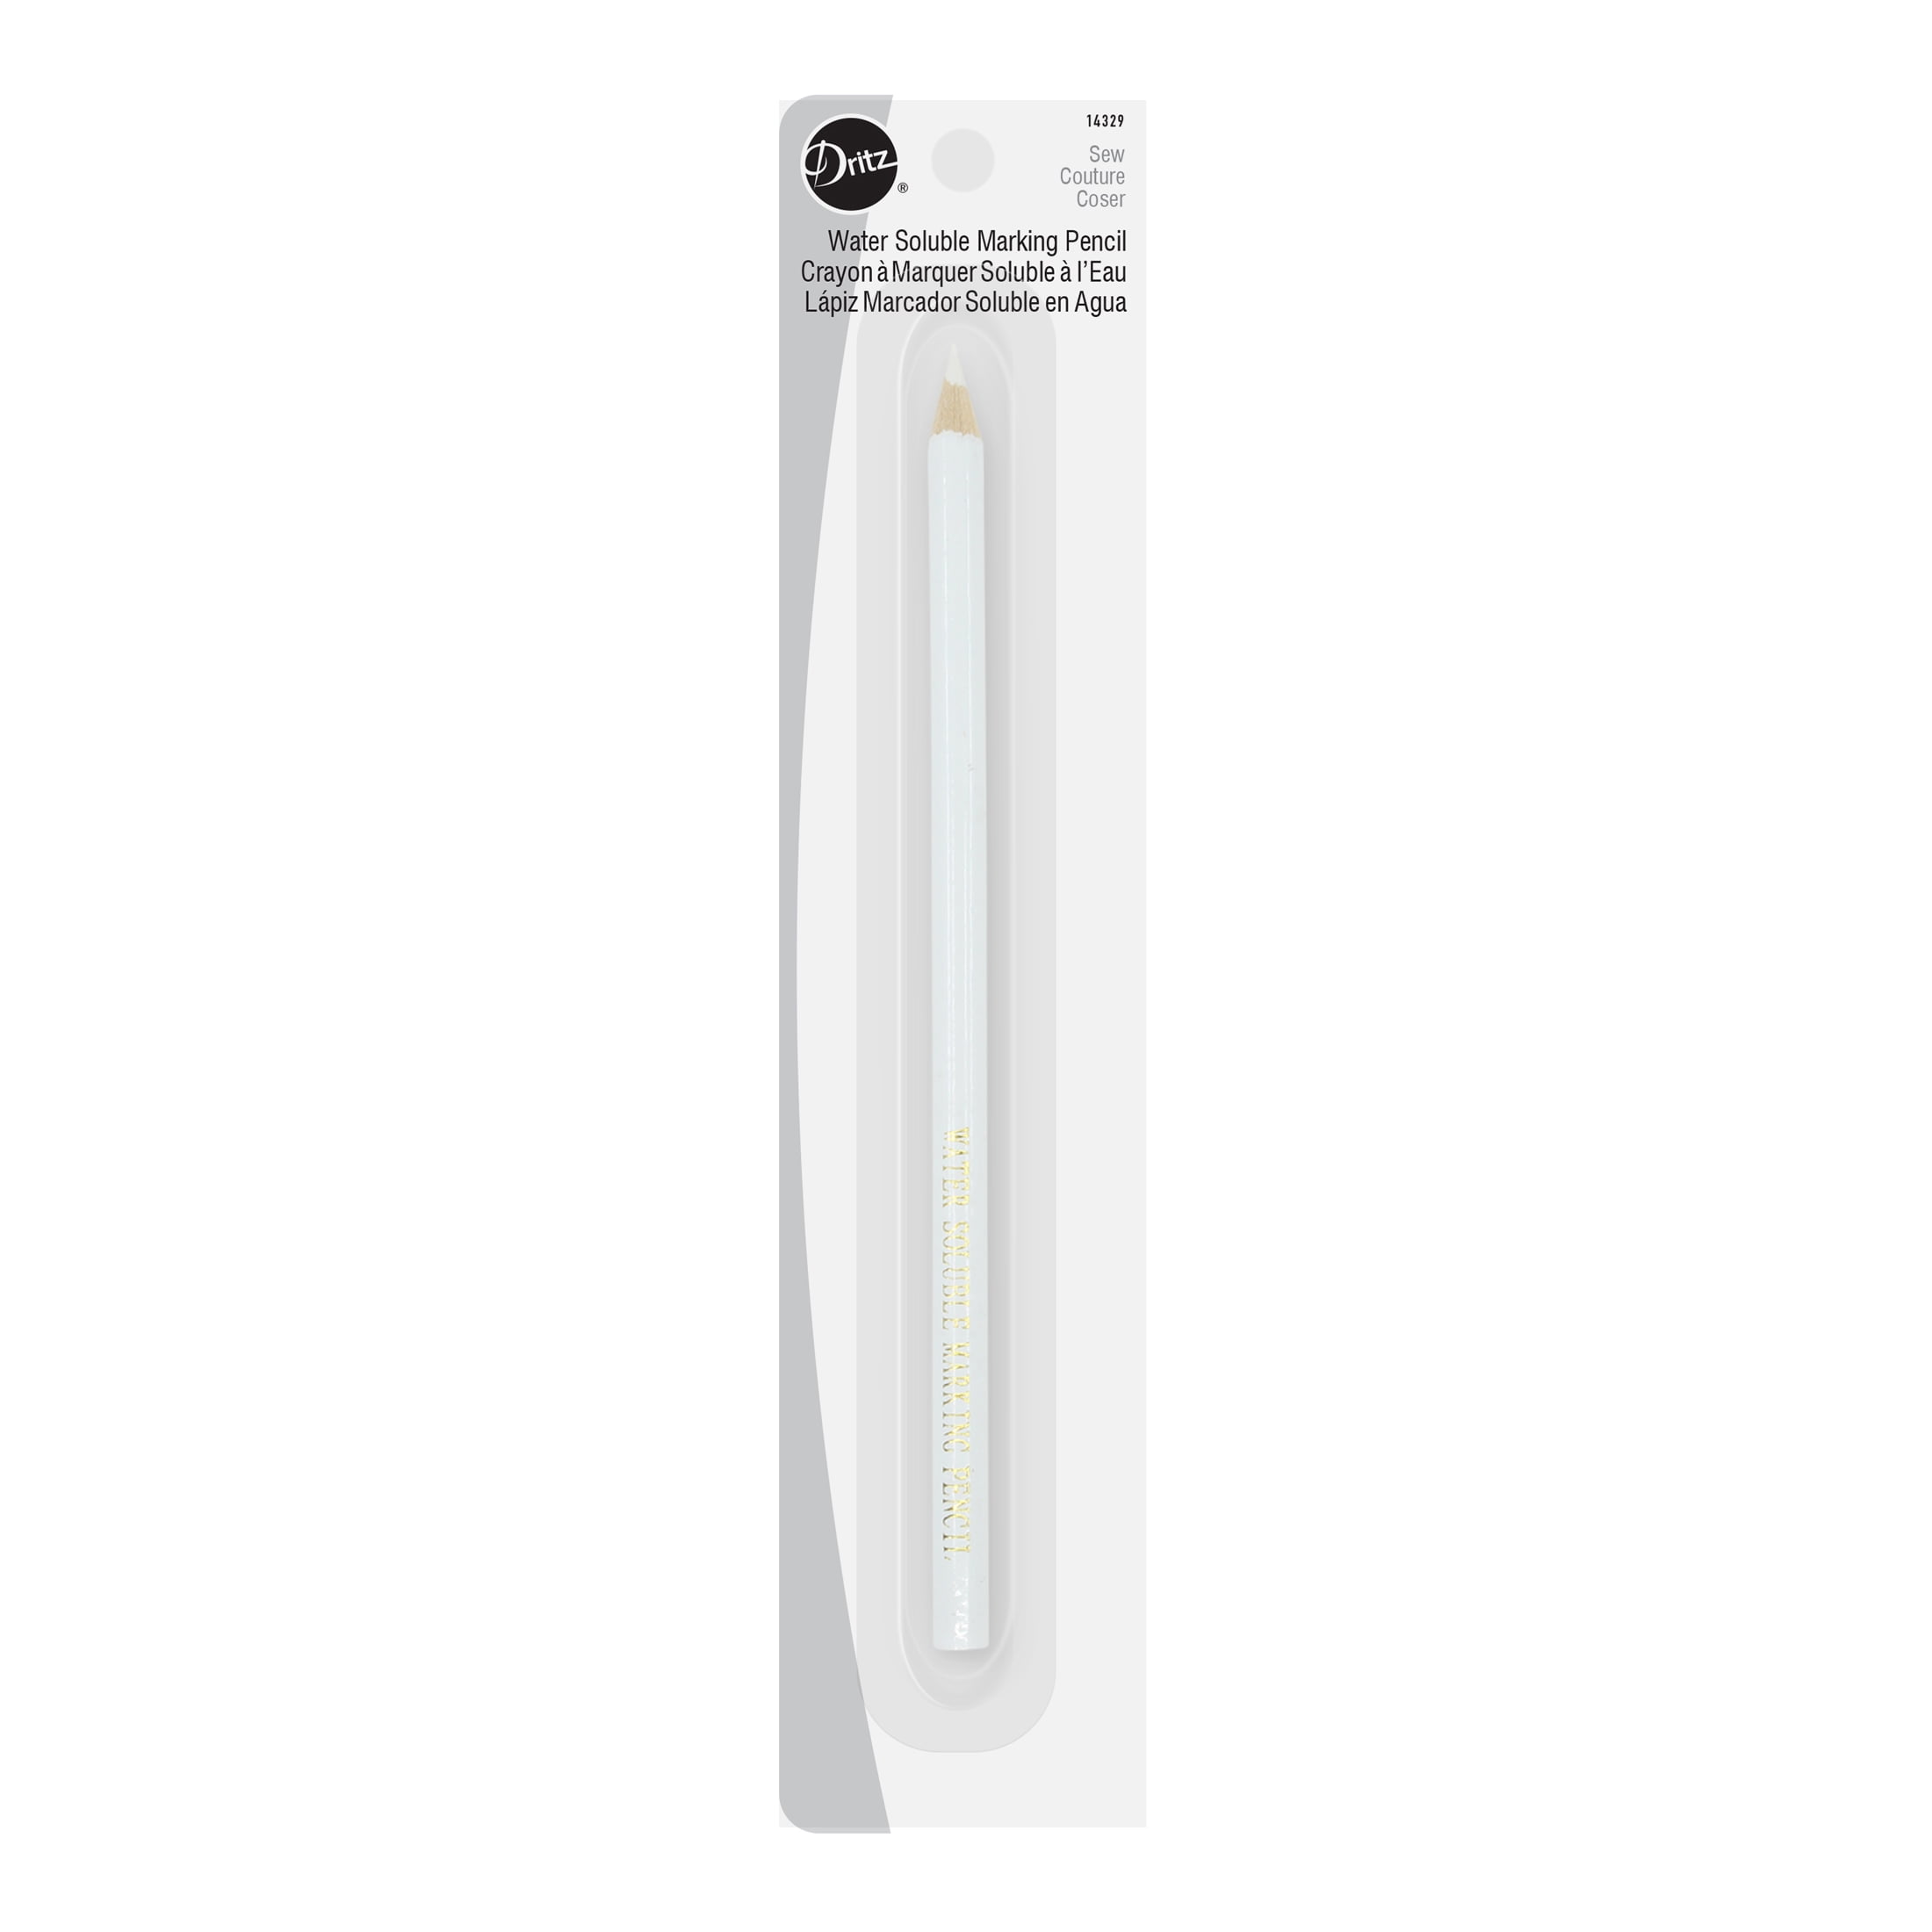 Generic Dritz White Water-Soluble Marking Pencil